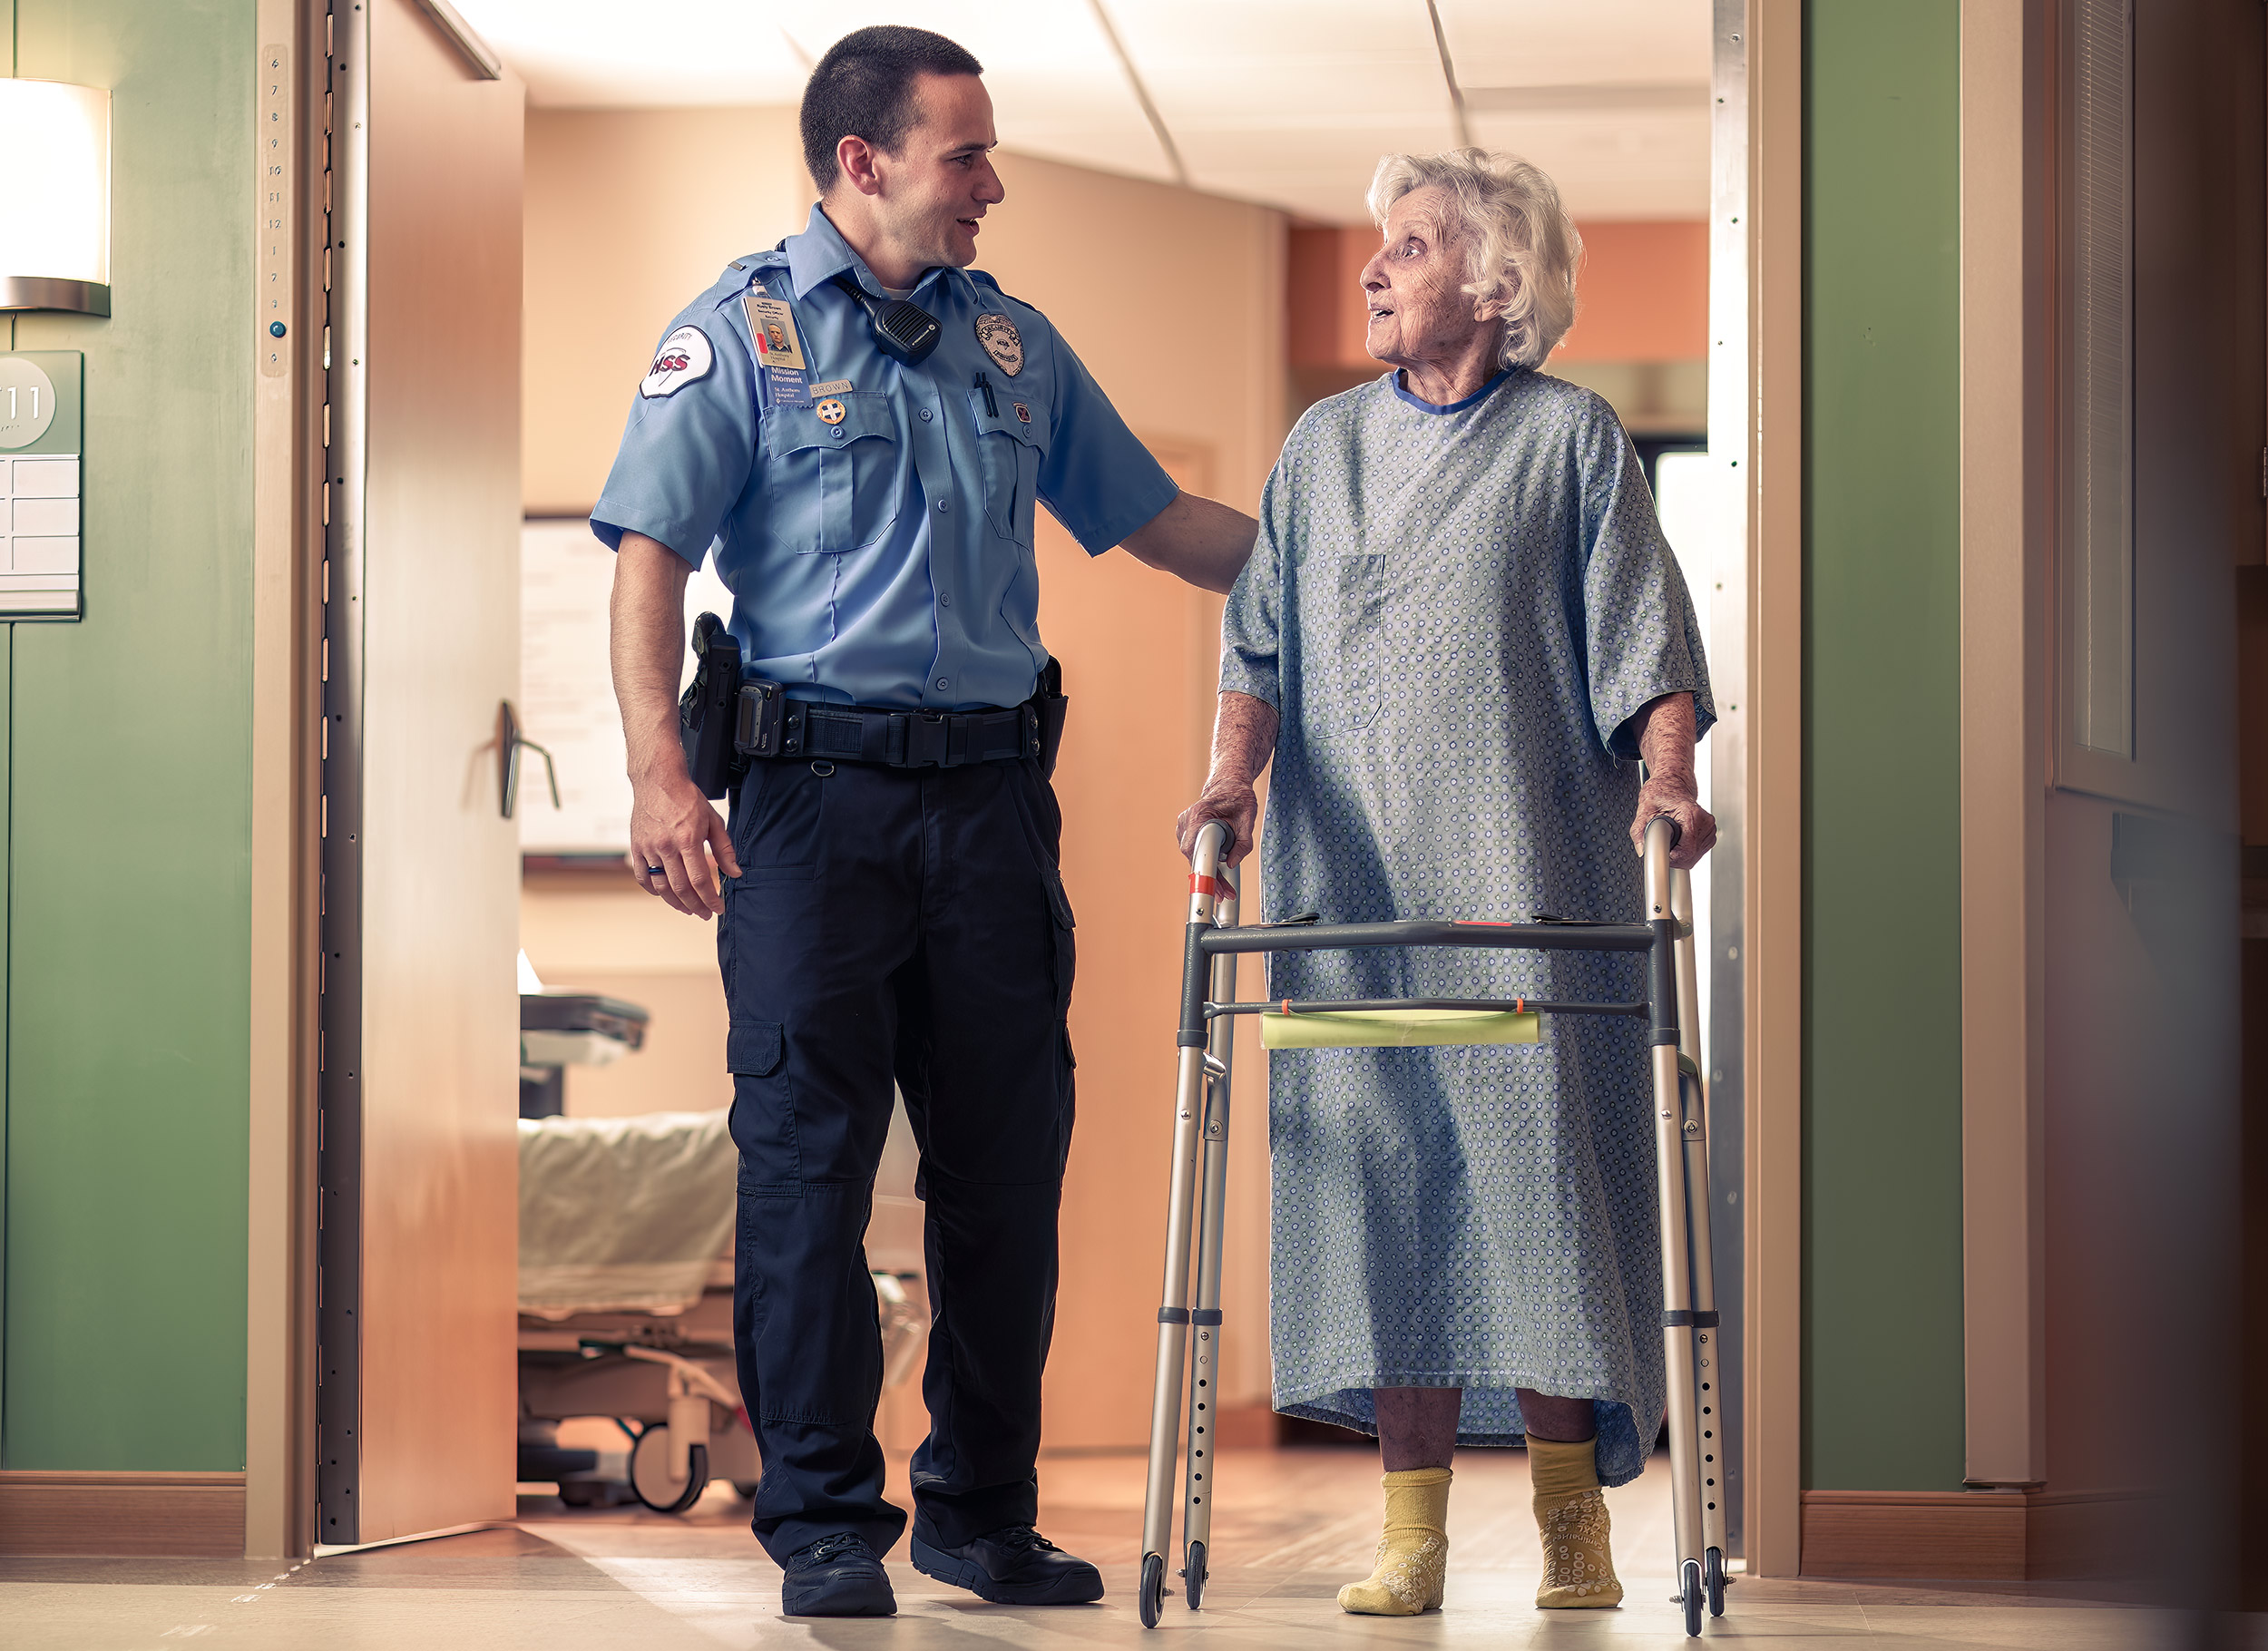 Security Officer helping hospital patient for HSS advertising. 